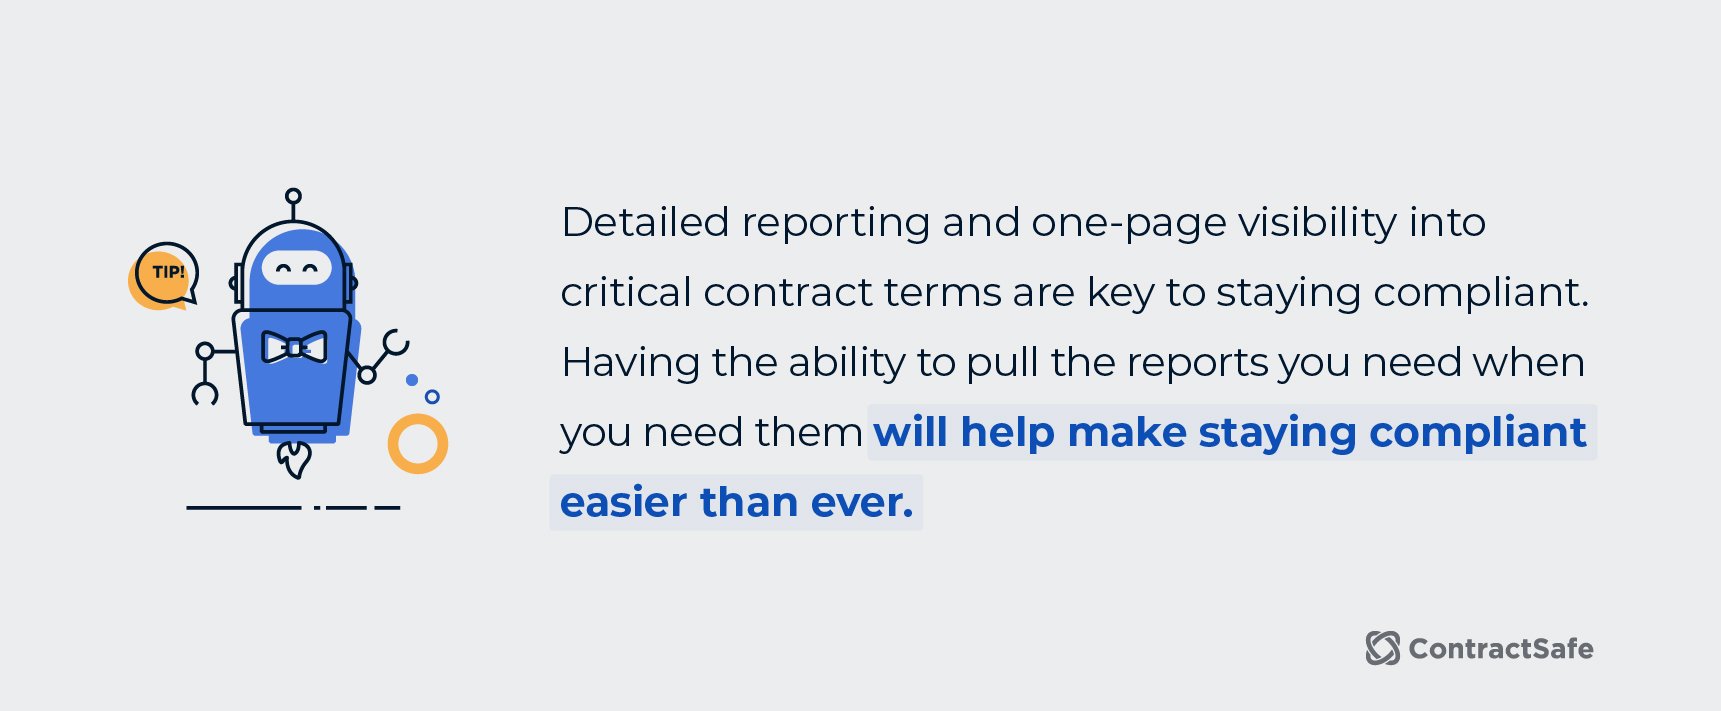 Detailed reporting and one-page visibility into critical conract terms are key to staying compliant. Having the ability to pull the reports you need when you need them will help make staying compliant easier than ever